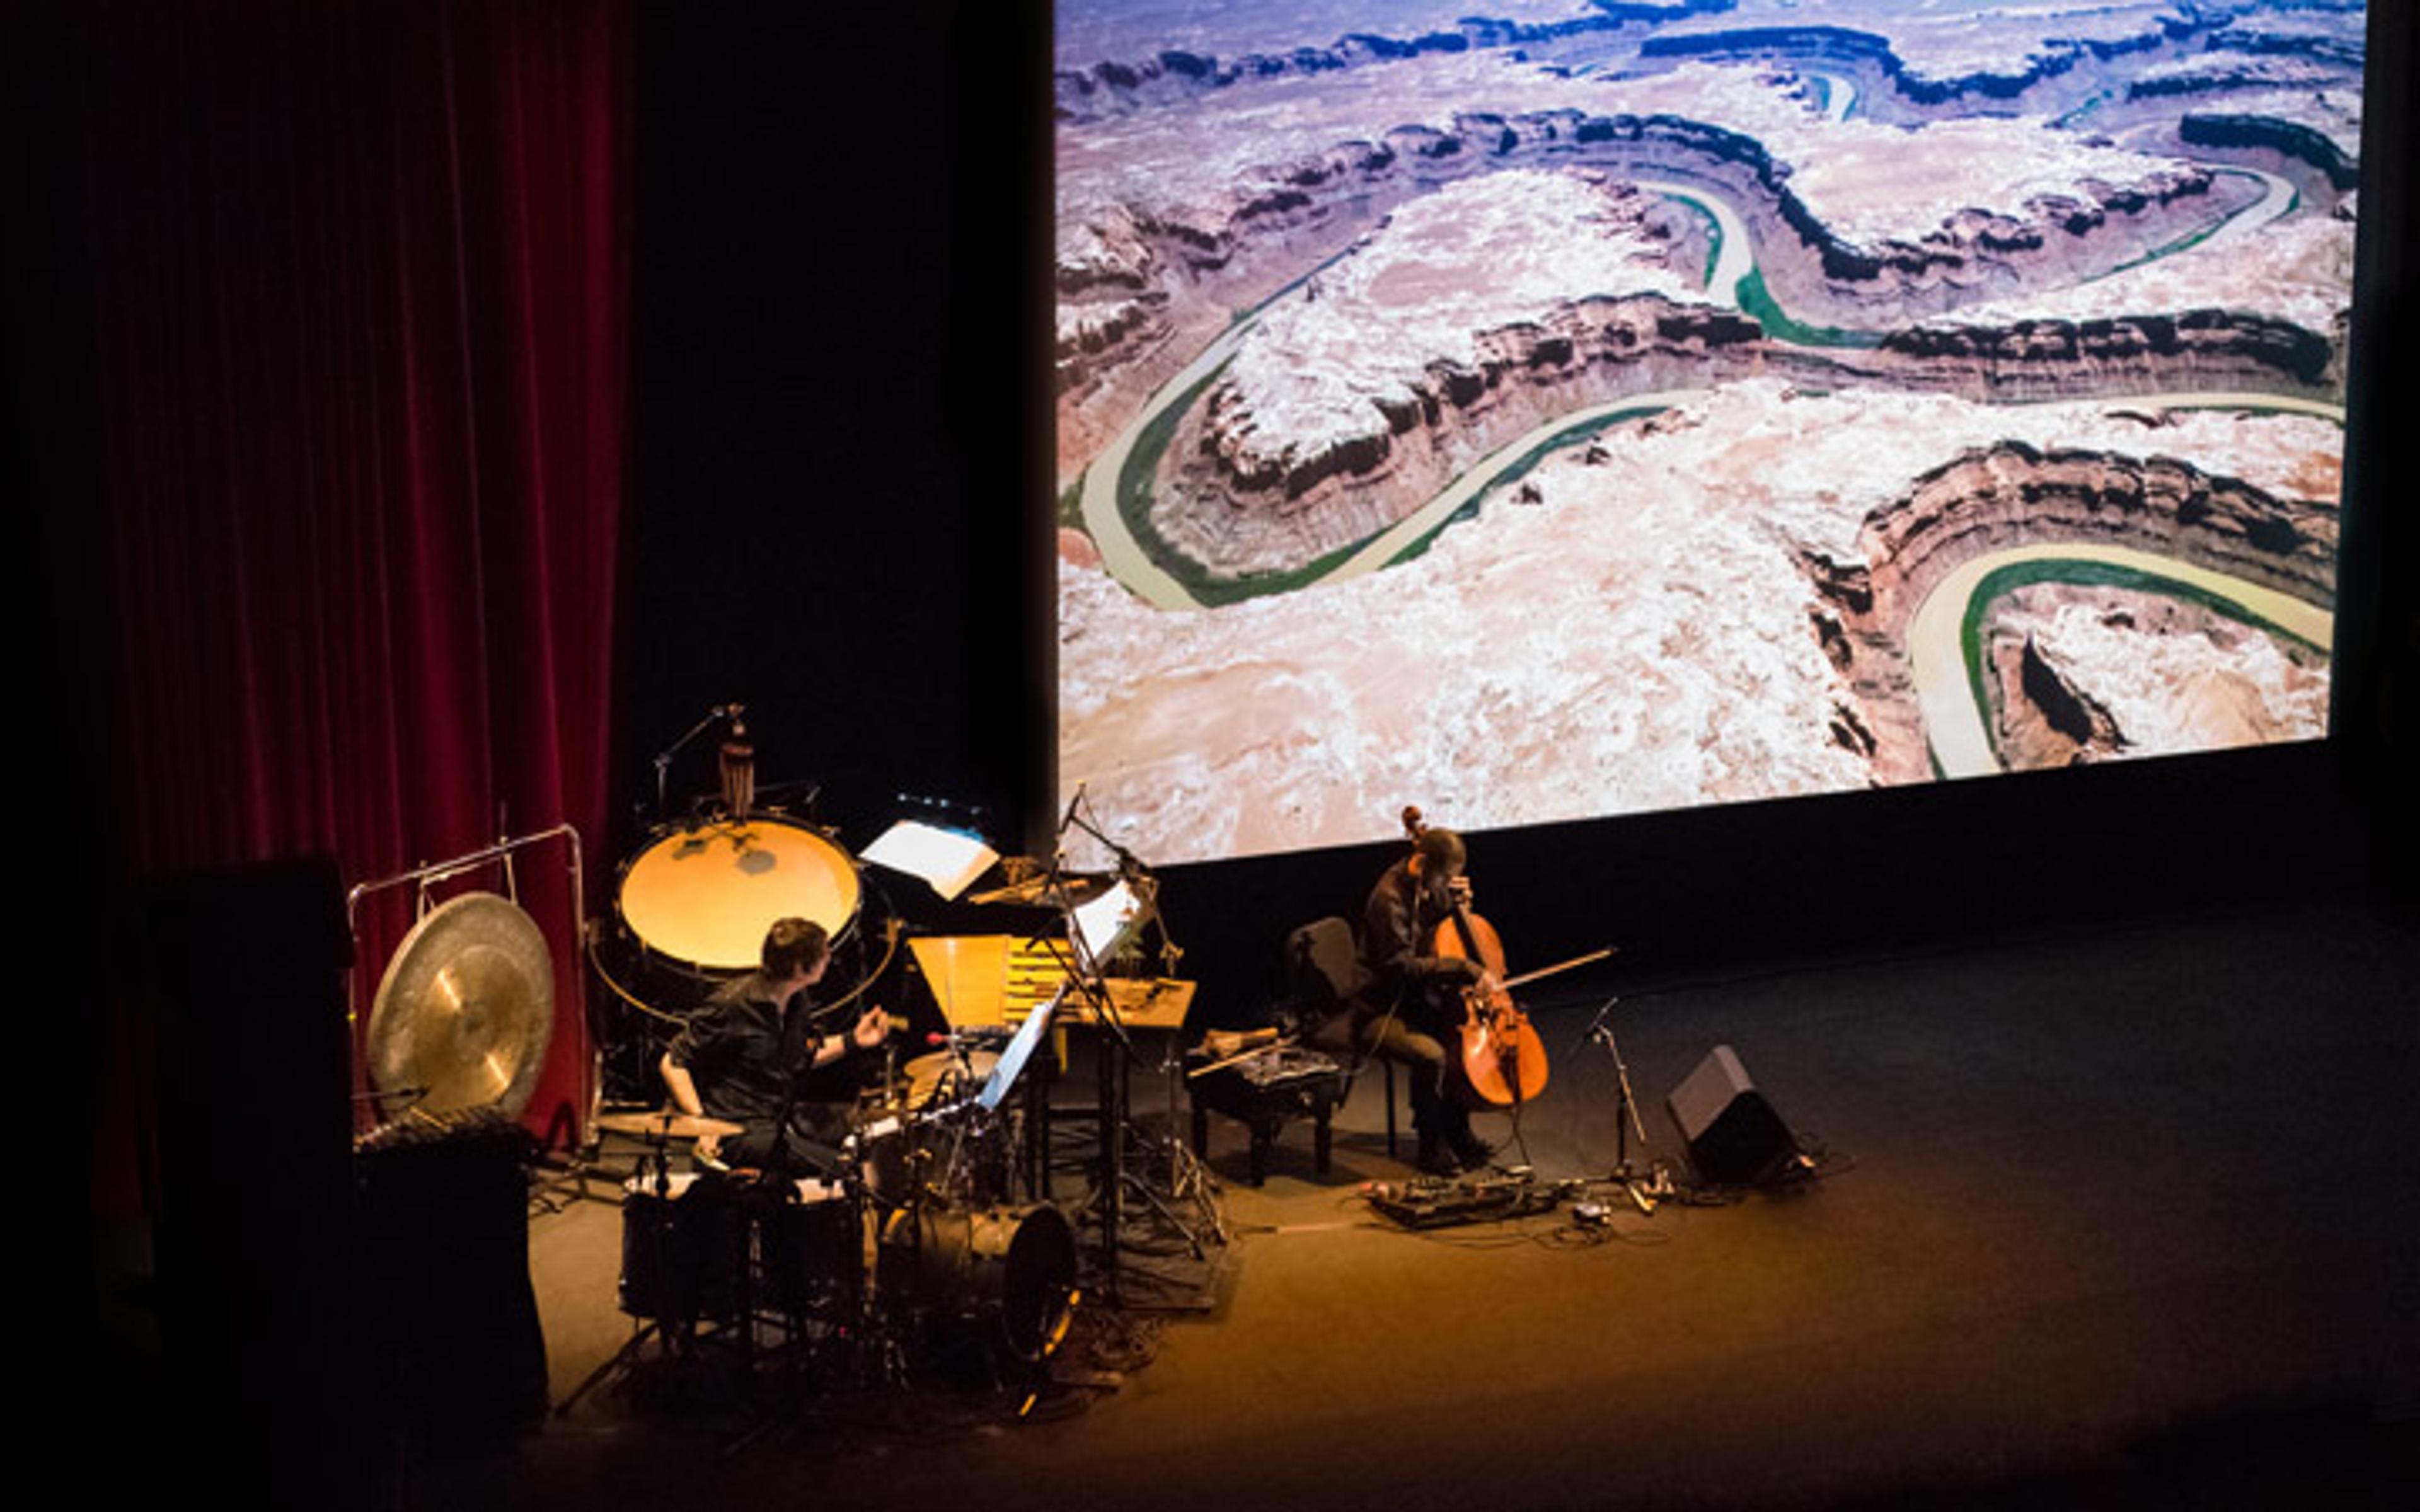 On a darkened stage several musicians perform before a screen projection of a film depicting the Colorado River basin